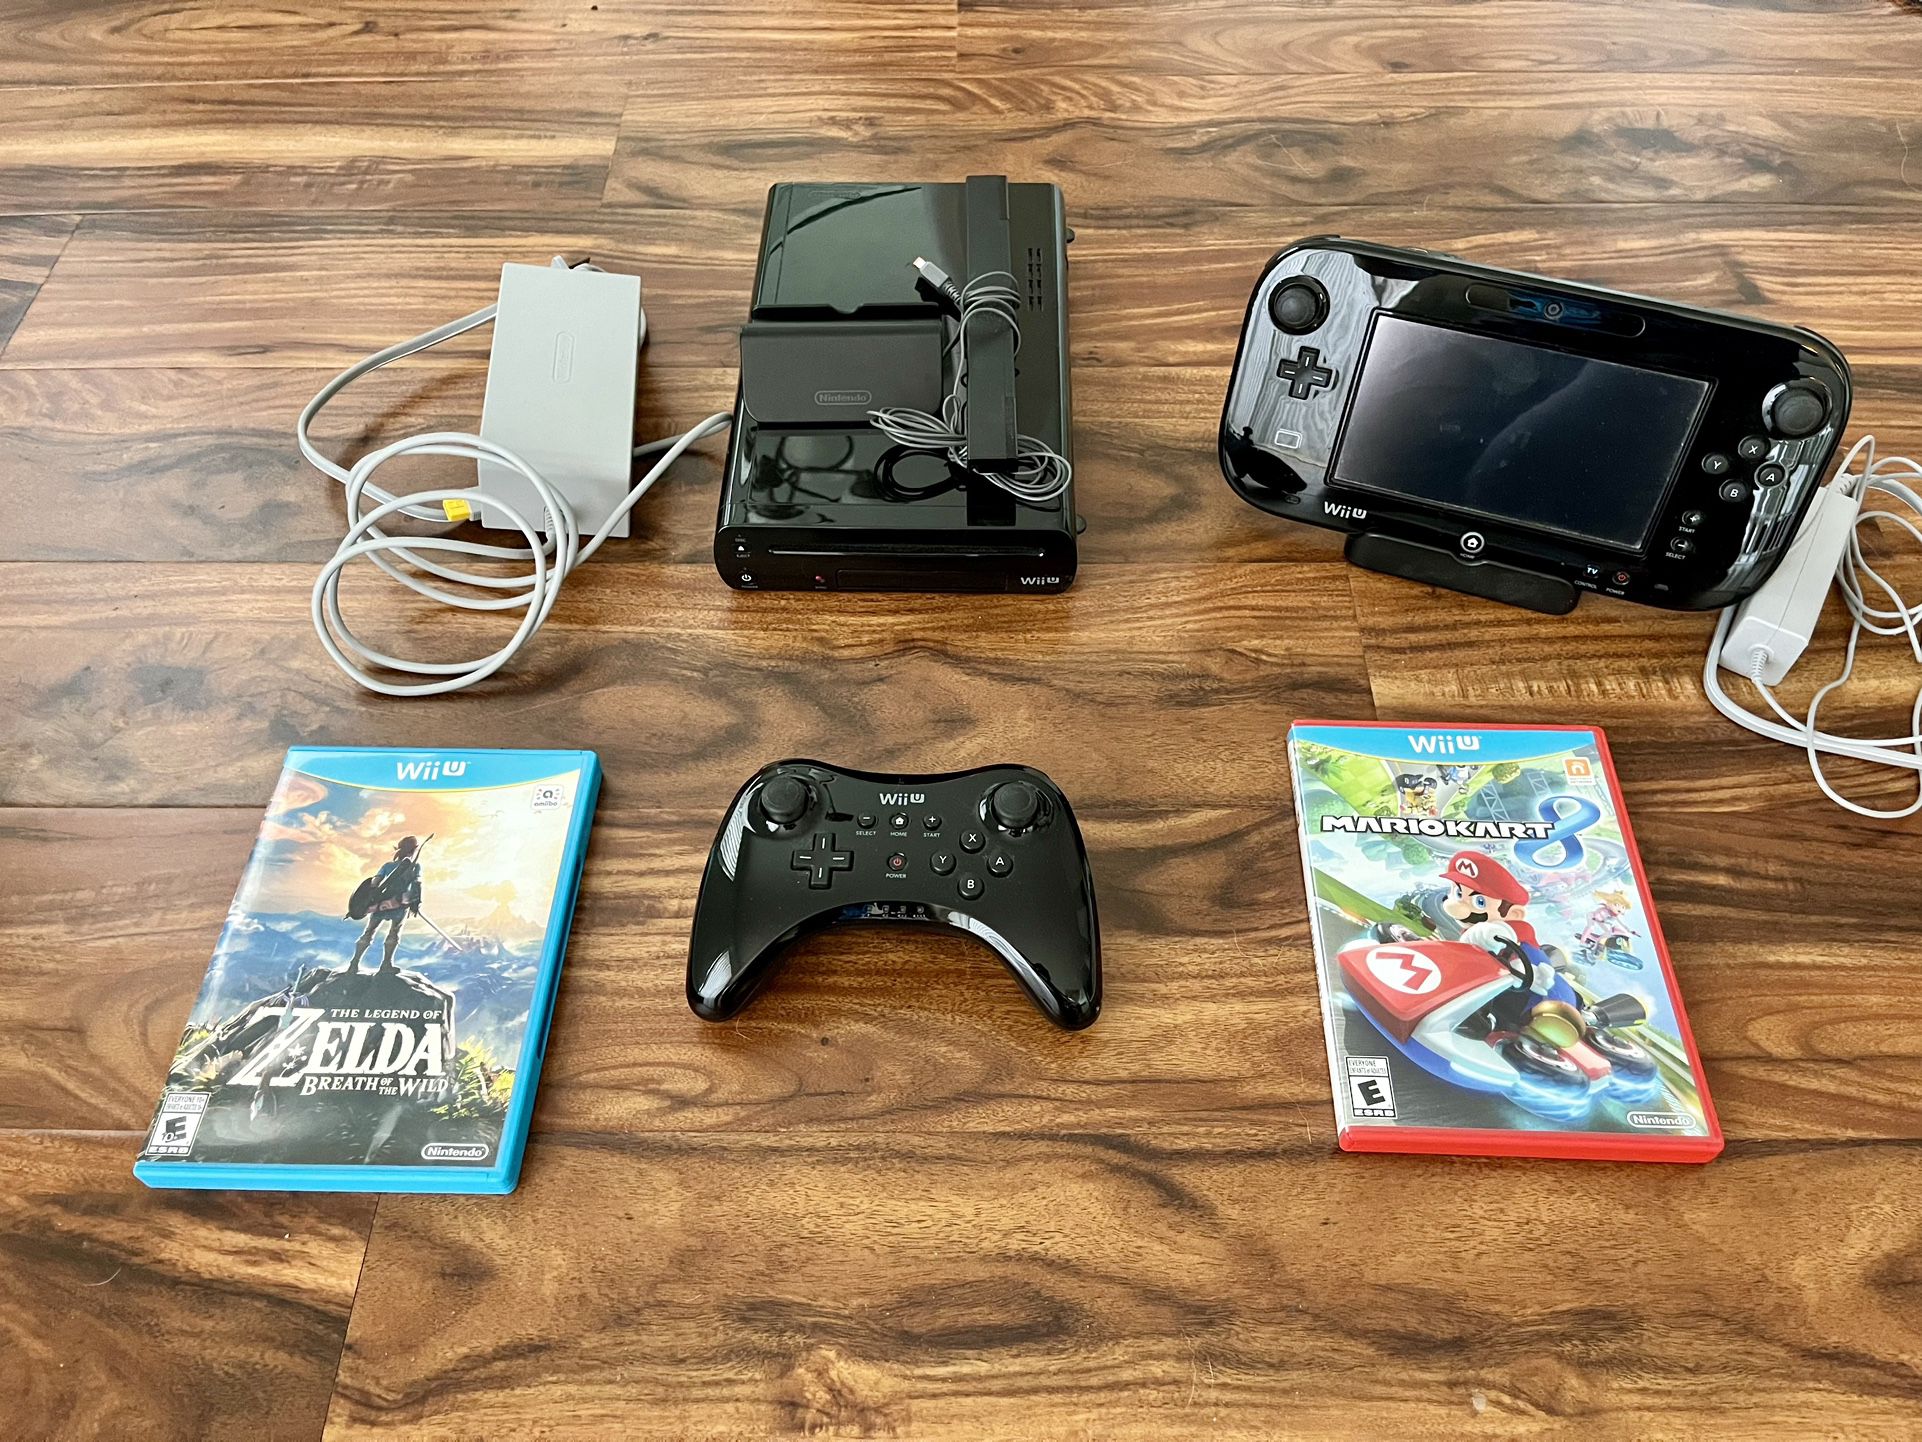 DELUXE 32GB GREAT WORKING CONDITION Nintendo Wii U (includes everything on pic)